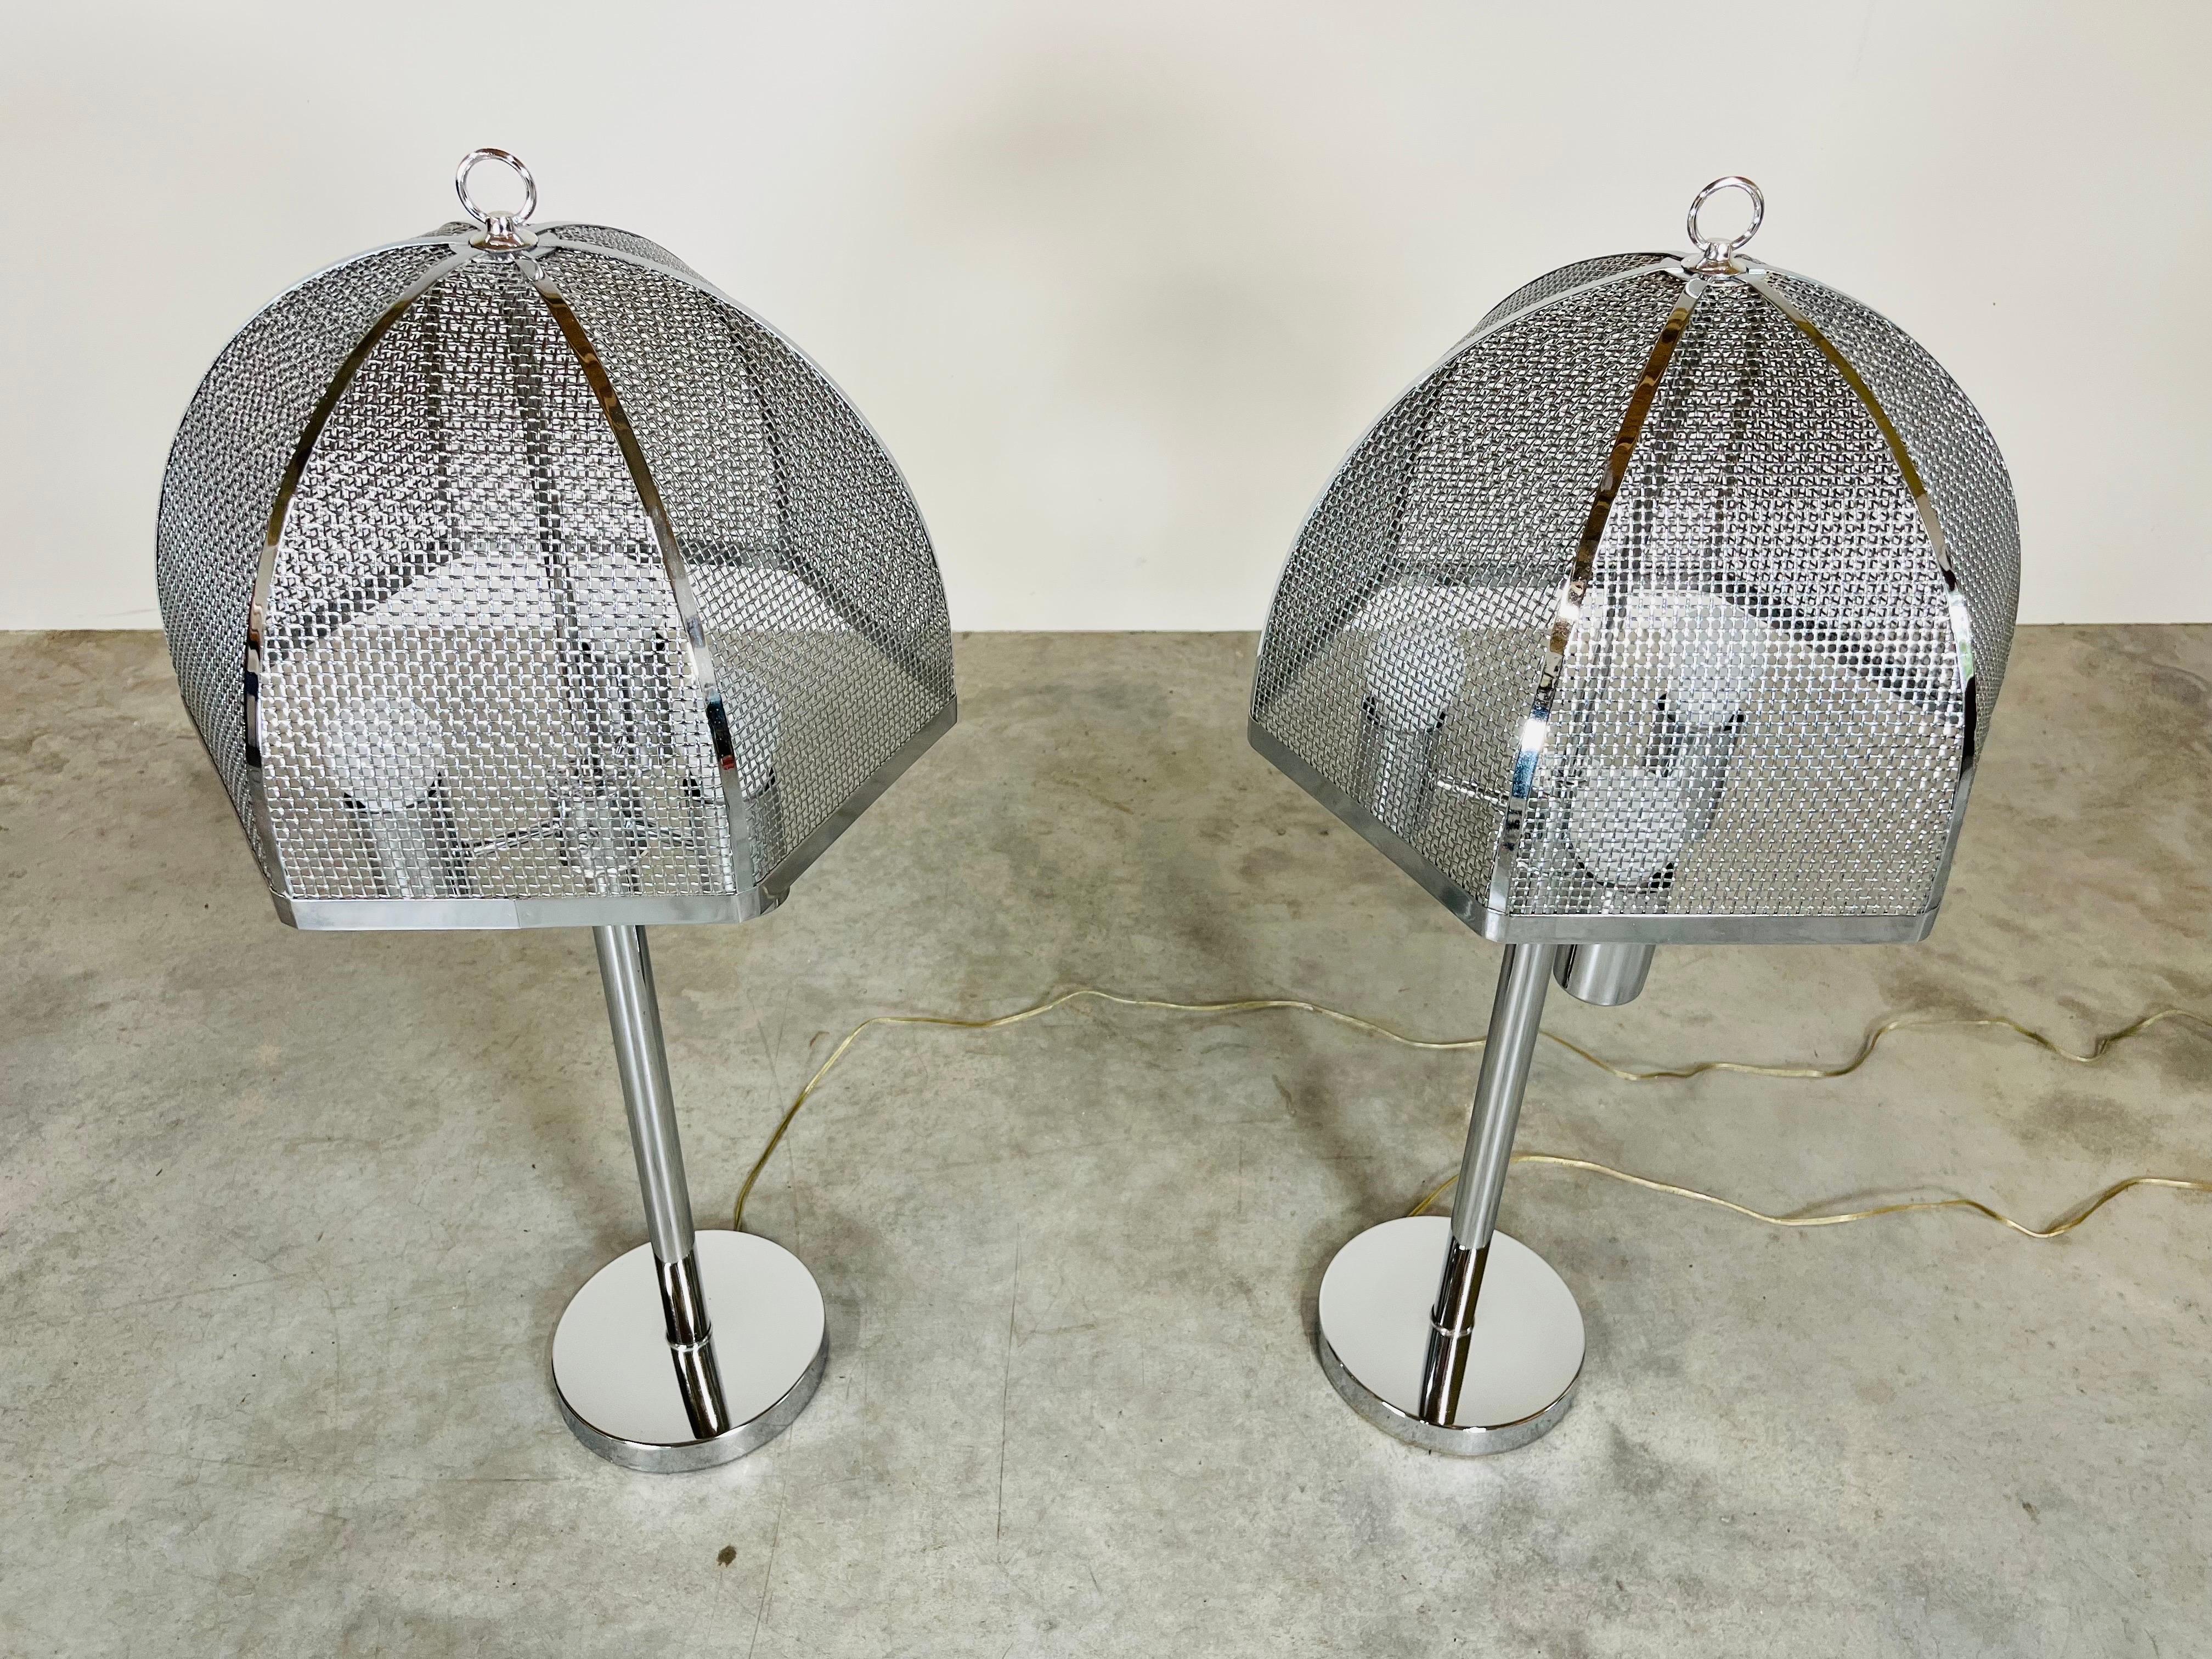 A striking pair of chromed steel table lamps in the manner of Laurel Lamp Company having chrome mesh shades. 
 In outstanding vintage condition having new wiring and phenomenal finish. No scratches or damage to report. These are as if they came out